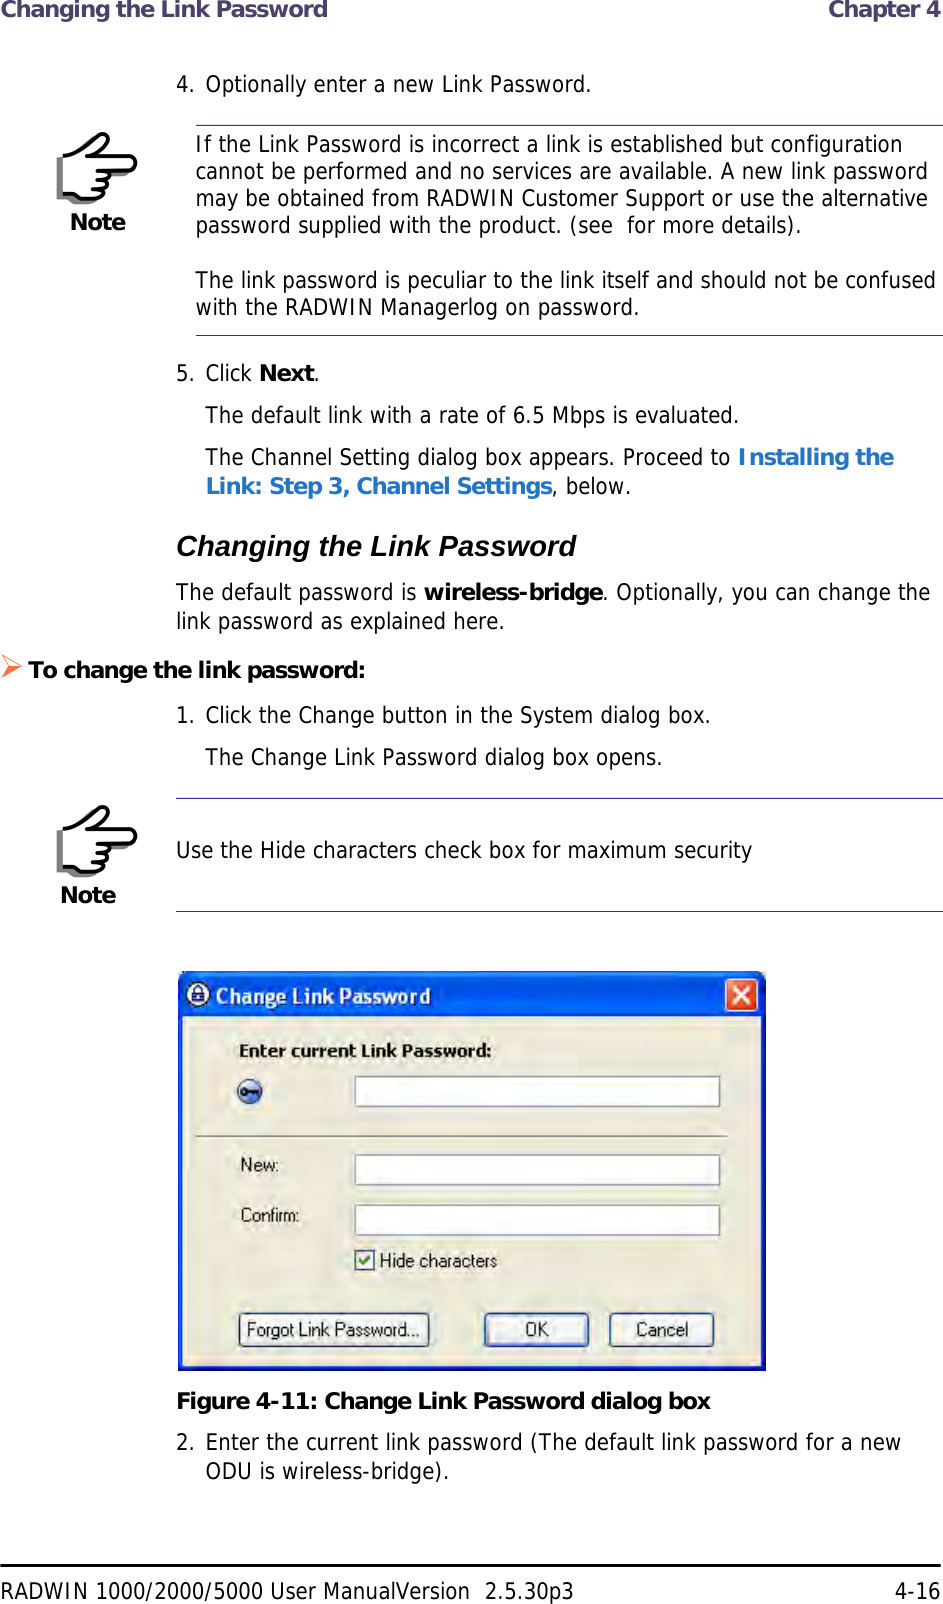 Changing the Link Password  Chapter 4RADWIN 1000/2000/5000 User ManualVersion  2.5.30p3 4-164. Optionally enter a new Link Password. 5. Click Next.The default link with a rate of 6.5 Mbps is evaluated.The Channel Setting dialog box appears. Proceed to Installing the Link: Step 3, Channel Settings, below.Changing the Link PasswordThe default password is wireless-bridge. Optionally, you can change the link password as explained here.To change the link password:1. Click the Change button in the System dialog box.The Change Link Password dialog box opens.Figure 4-11: Change Link Password dialog box2. Enter the current link password (The default link password for a new ODU is wireless-bridge).NoteIf the Link Password is incorrect a link is established but configuration cannot be performed and no services are available. A new link password may be obtained from RADWIN Customer Support or use the alternative password supplied with the product. (see  for more details).The link password is peculiar to the link itself and should not be confused with the RADWIN Managerlog on password.NoteUse the Hide characters check box for maximum security